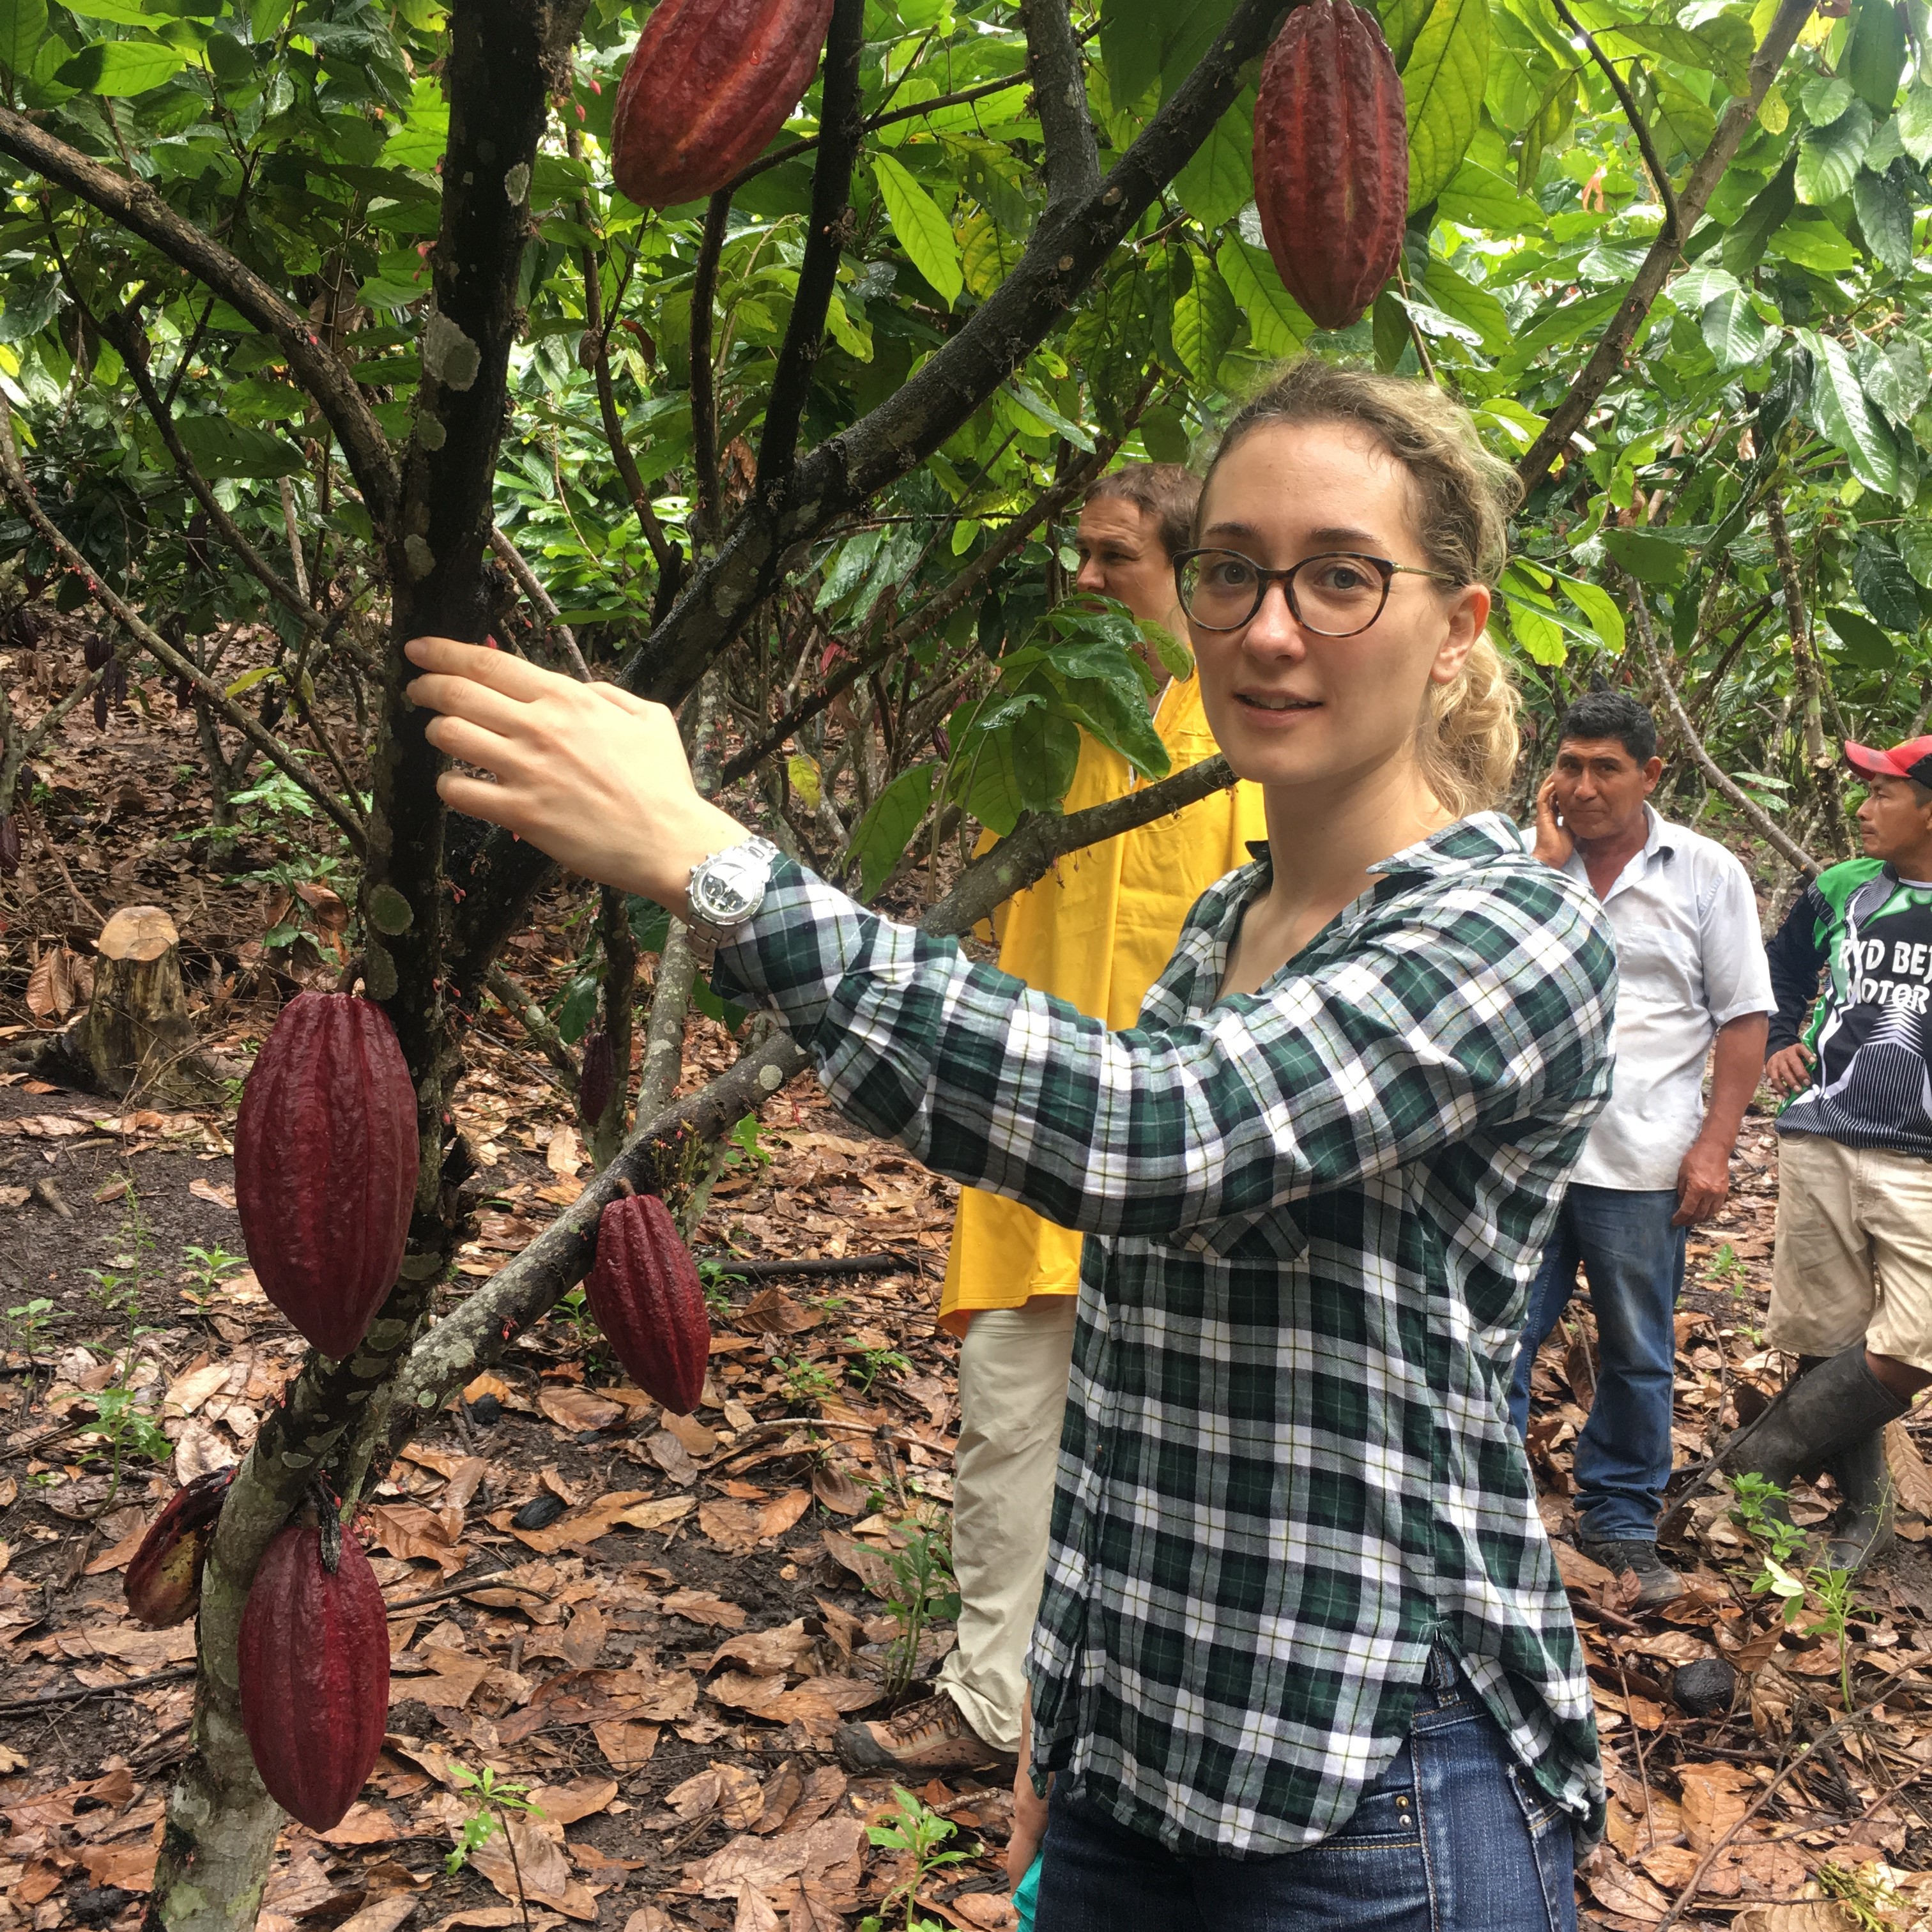 conducting a sustainability assessment in a cocoa producing region in Peru.